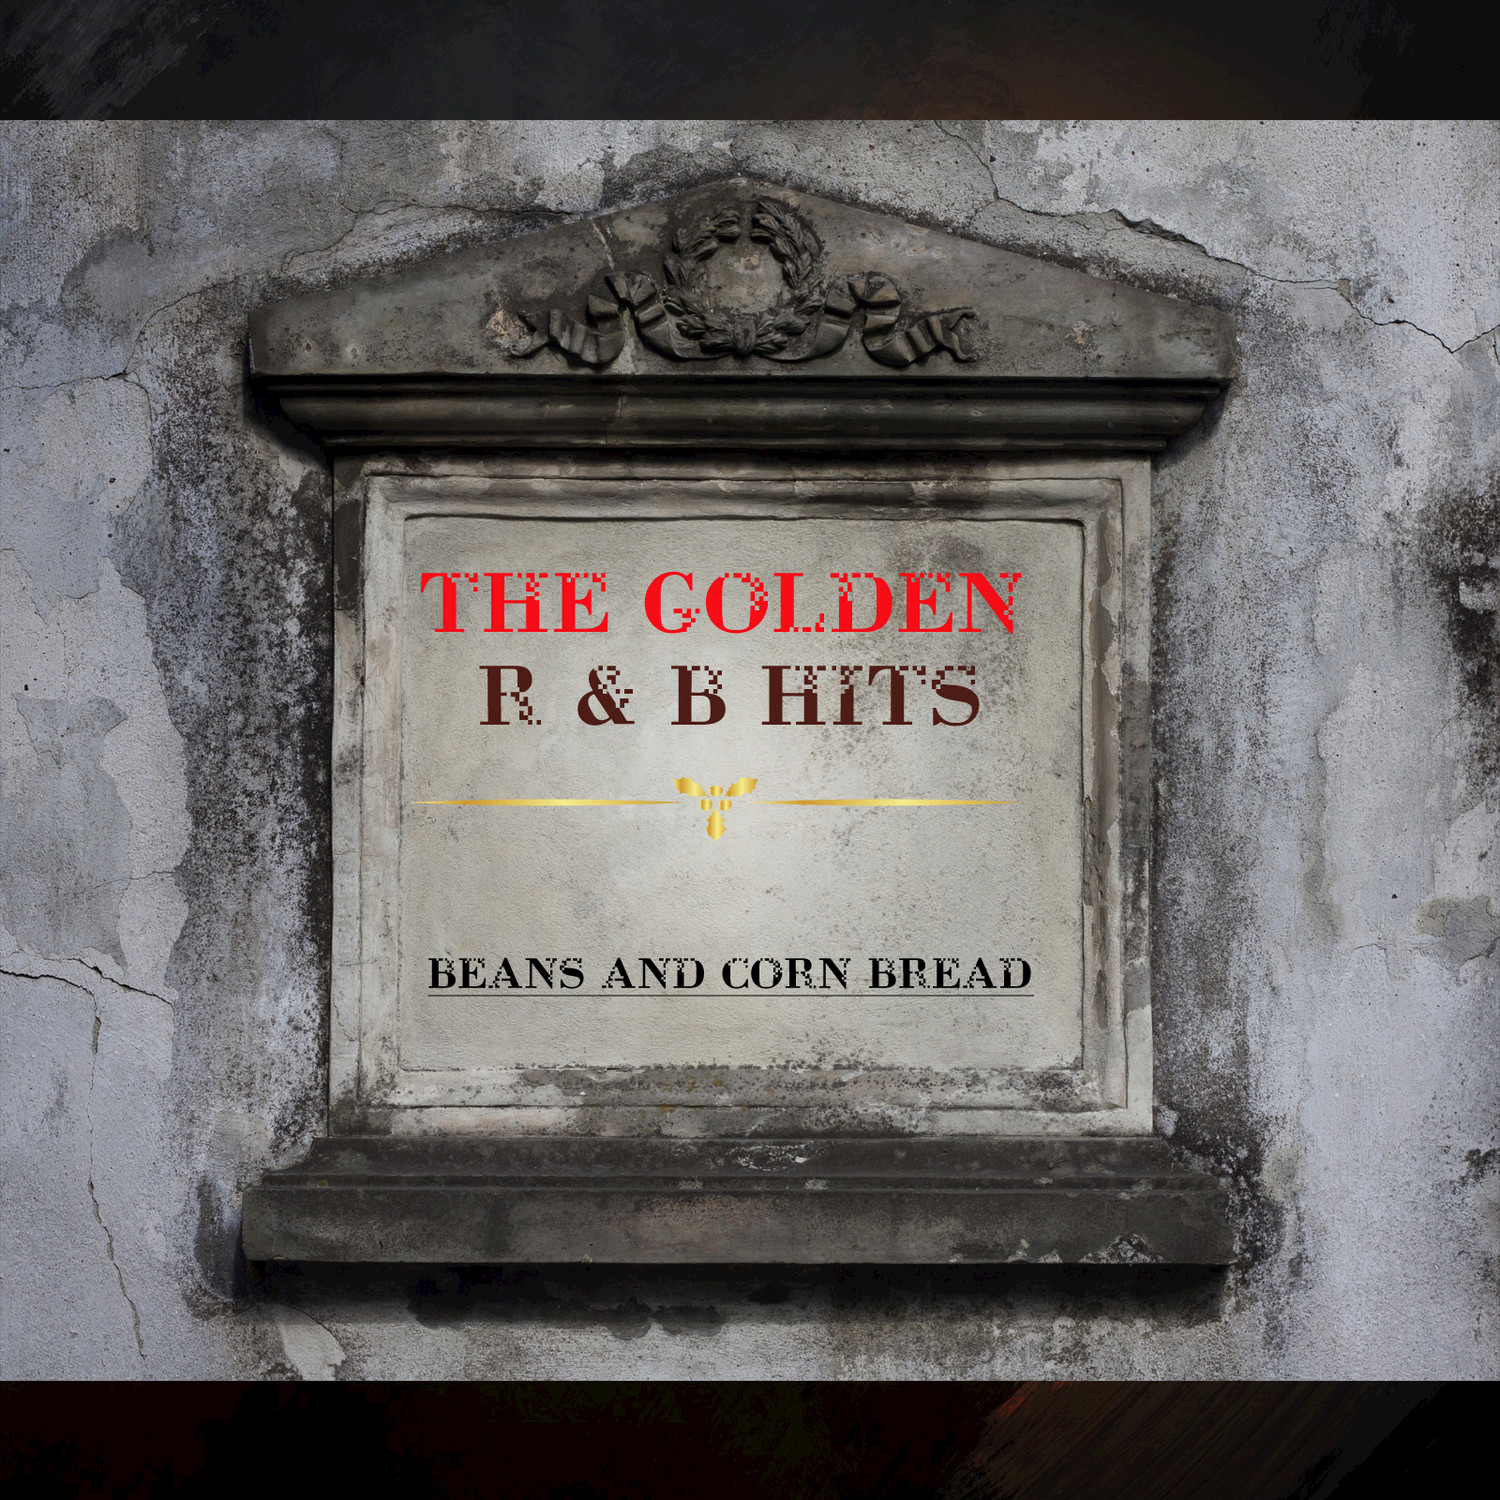 The Golden R & B Hits: Beans and Corn Bread